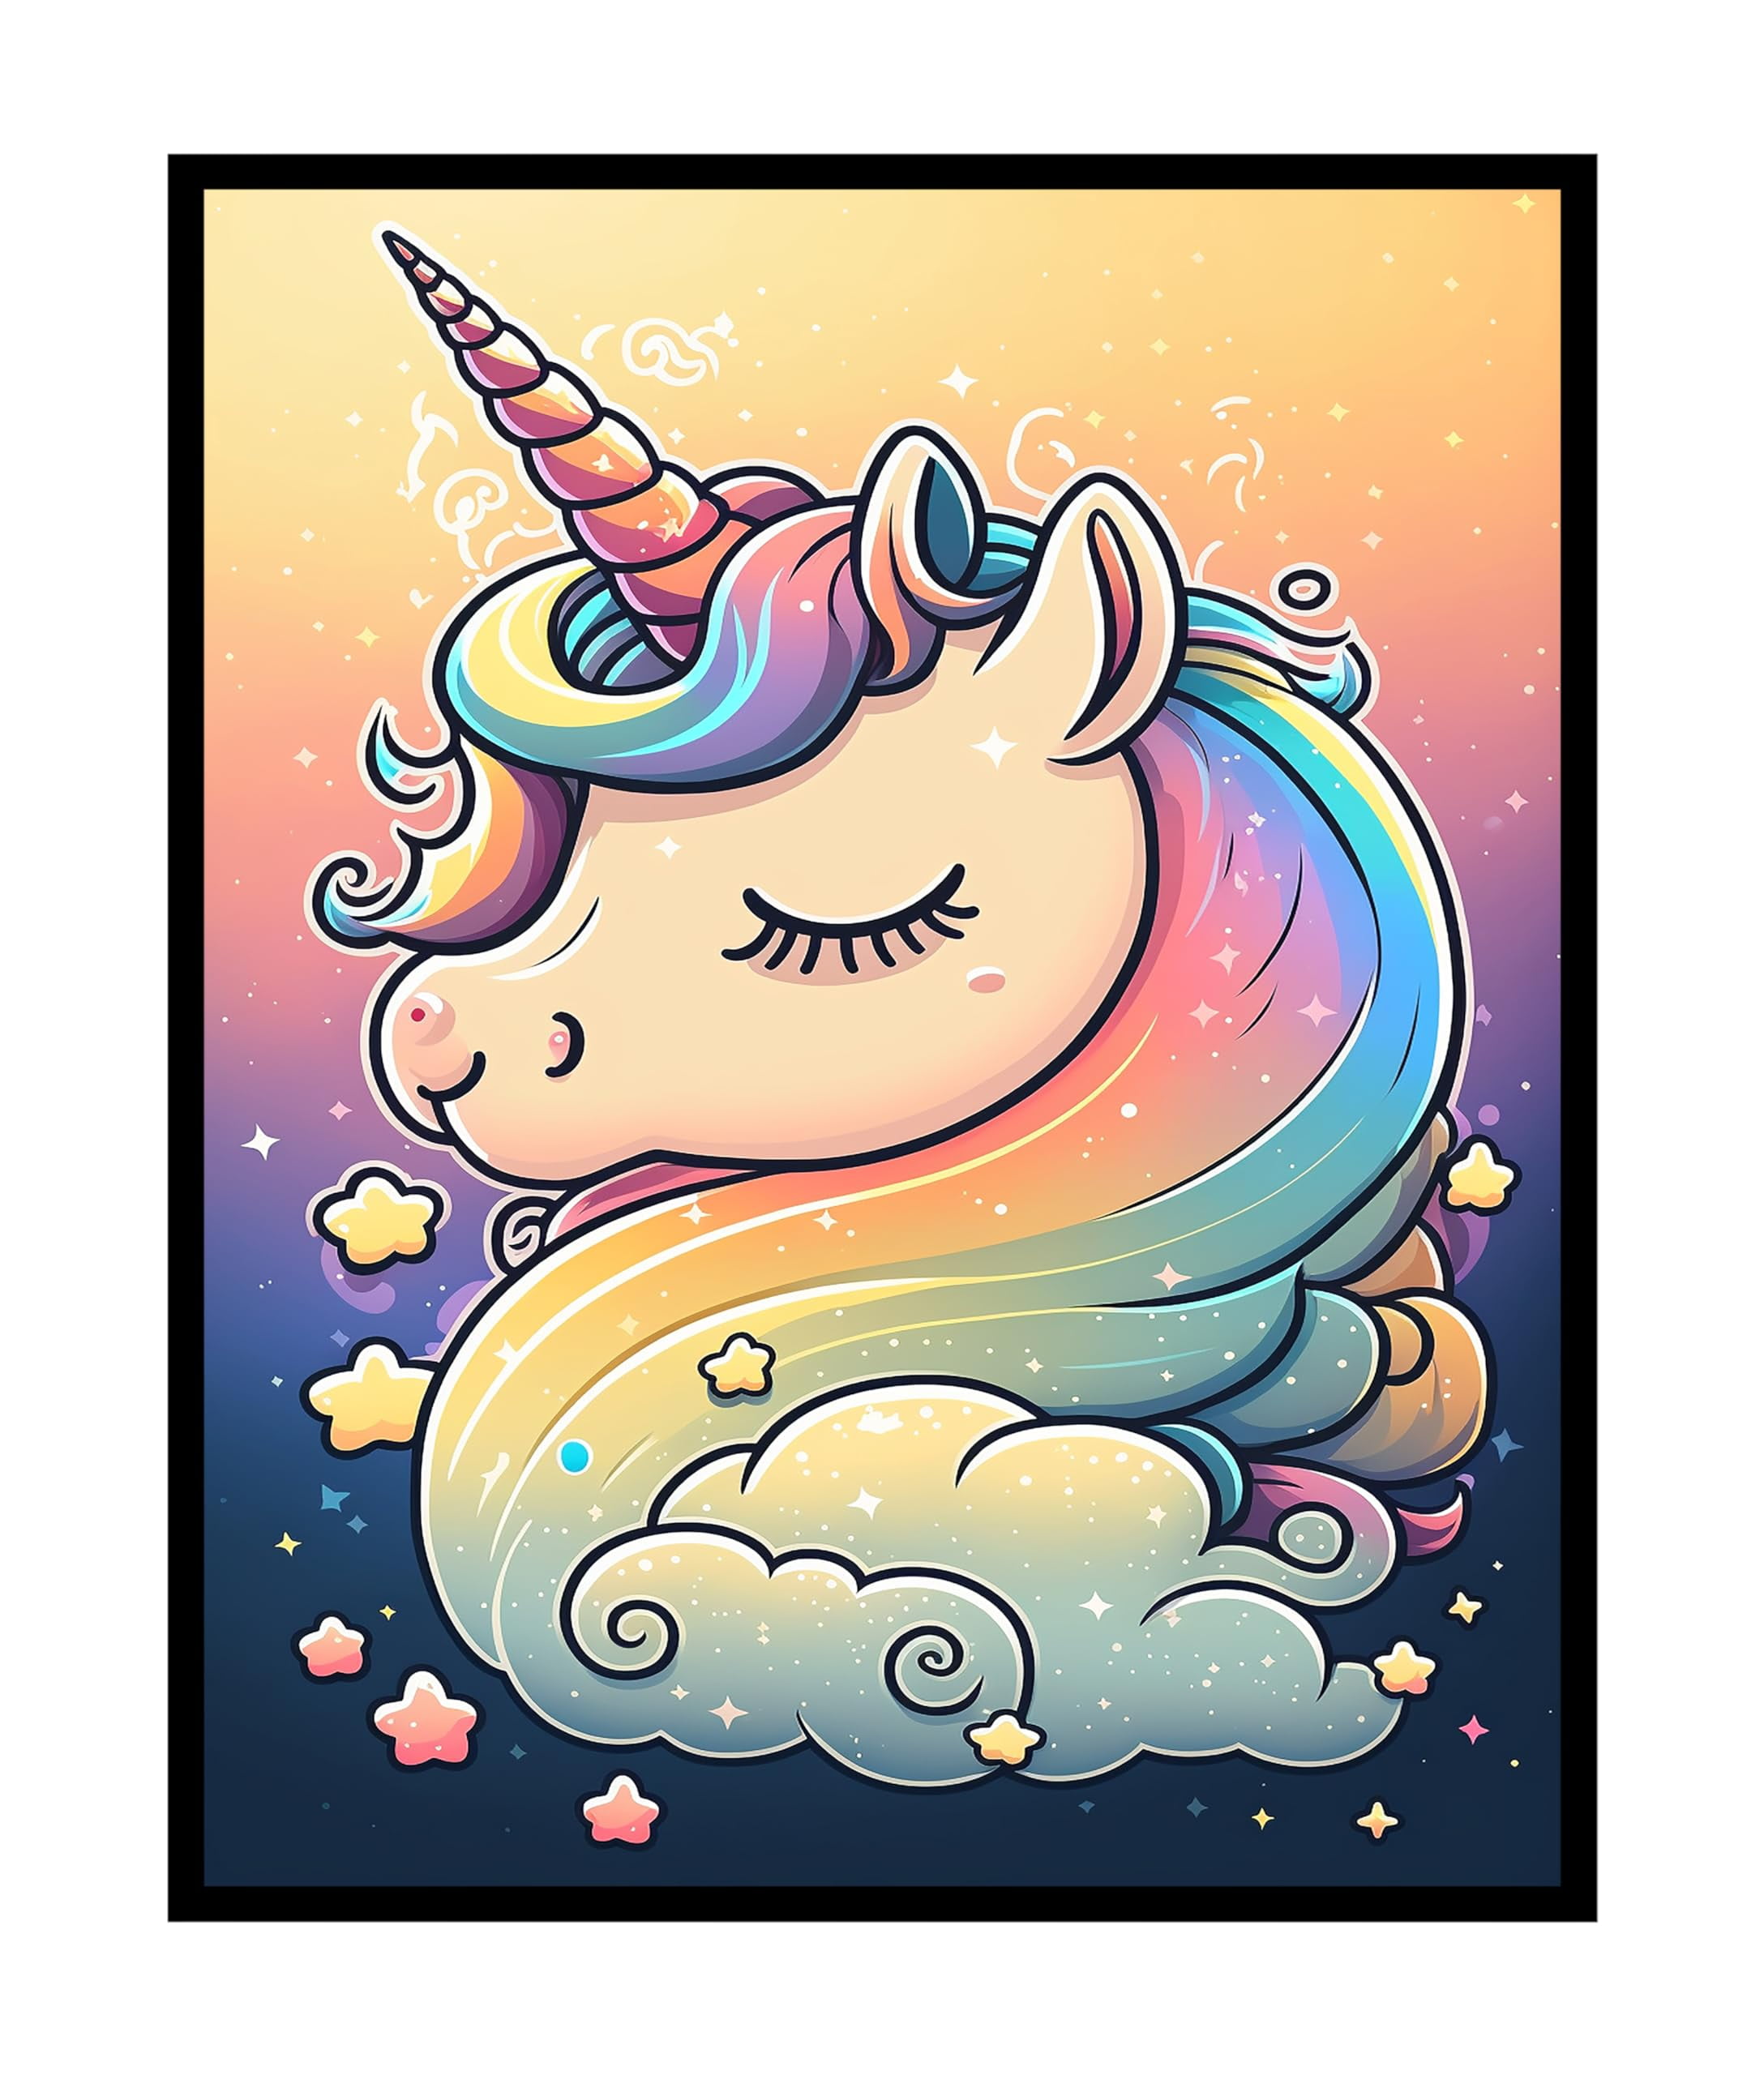 Buy Velvet Coloring Posters for Girl Gifts - Unicorn Princess Fun Arts and  Crafts Kit - Creative Art Project - Best Birthday Gift for 5+ Year Old  Girls - Fuzzy Posters to